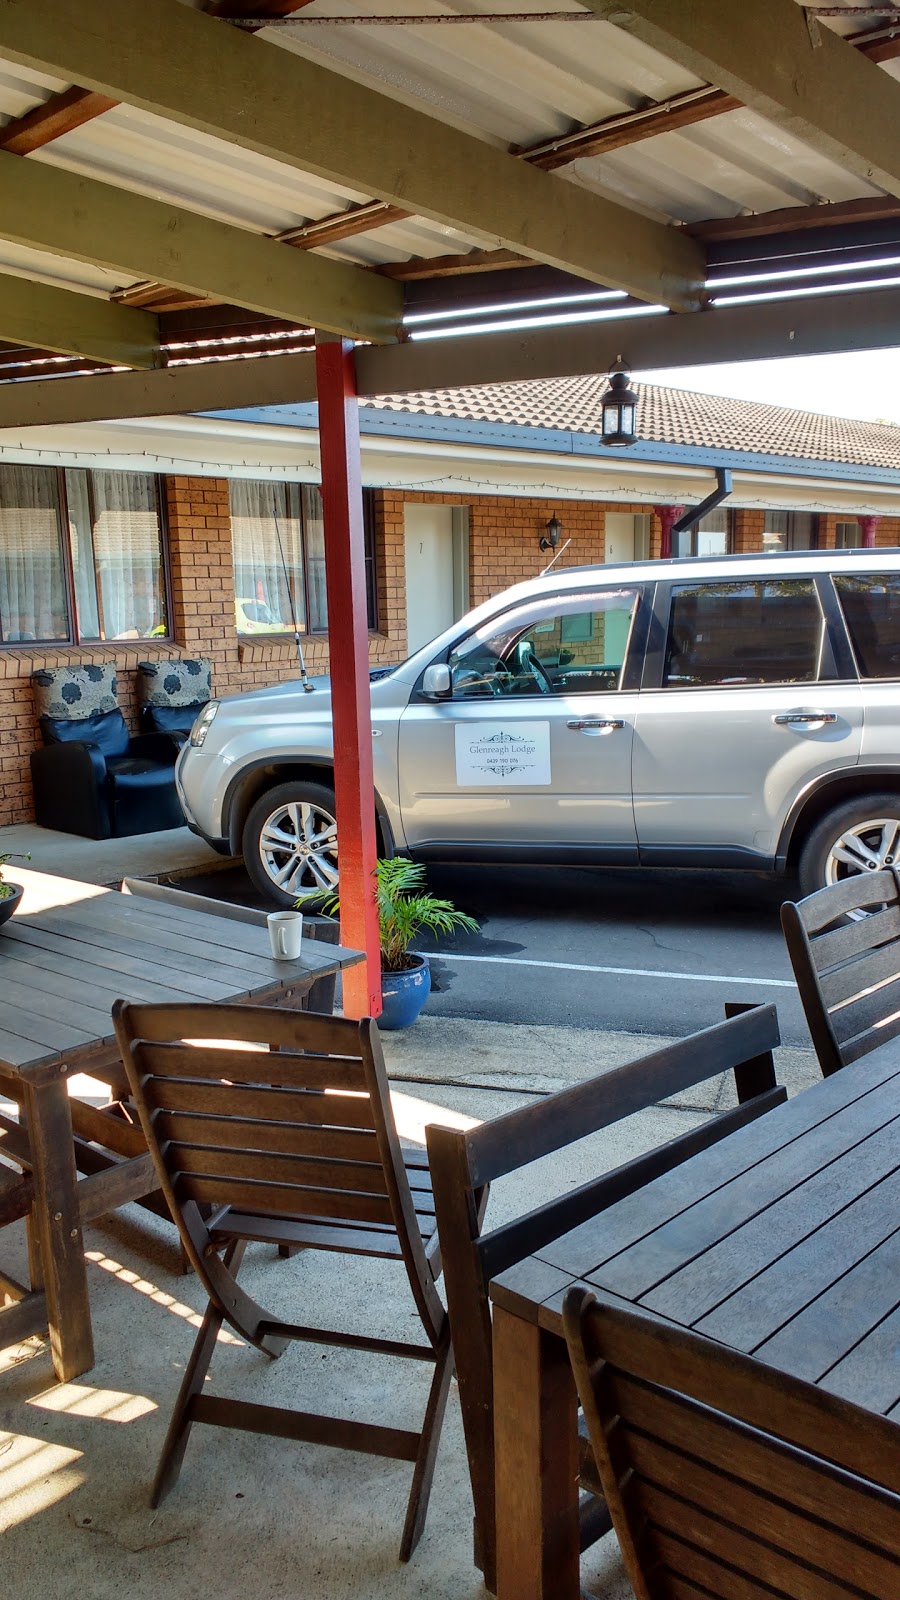 Woongarra Motel | lodging | 5-7 The Parade, North Haven NSW 2443, Australia | 0265599088 OR +61 2 6559 9088